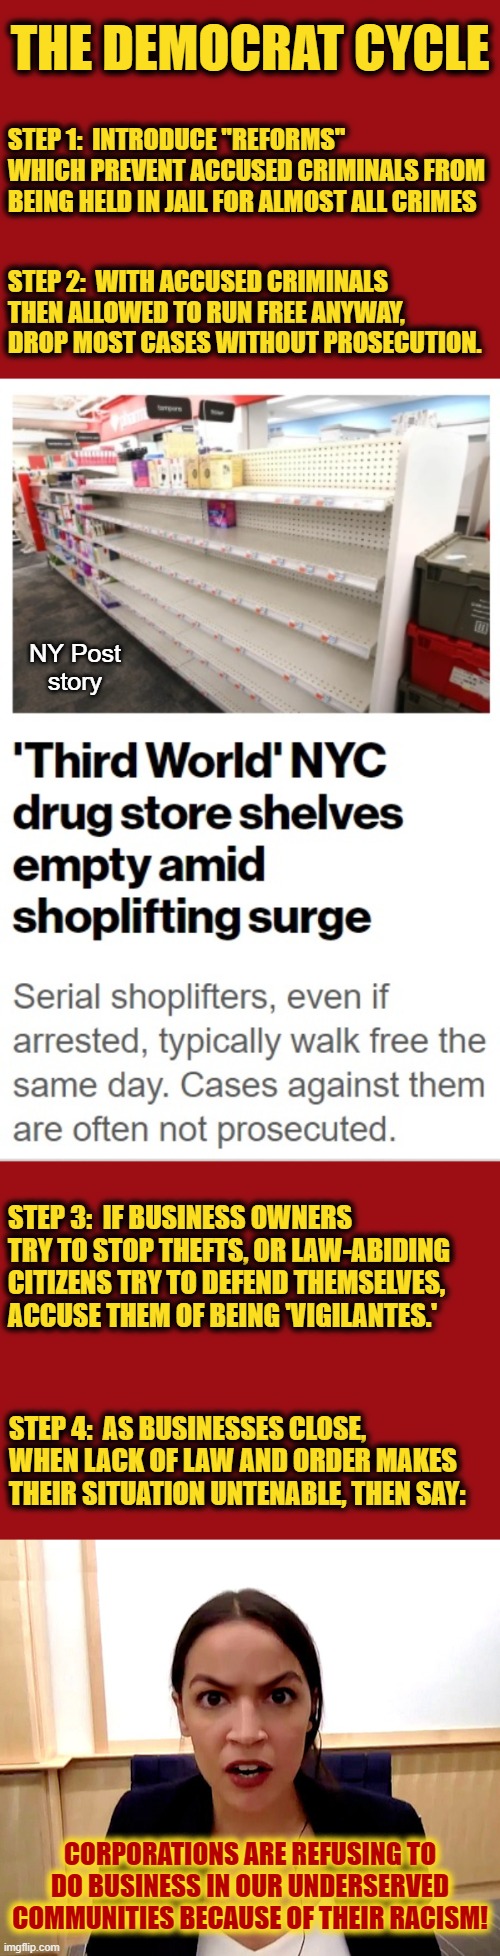 THE DEMOCRAT CYCLE; STEP 1:  INTRODUCE "REFORMS" WHICH PREVENT ACCUSED CRIMINALS FROM BEING HELD IN JAIL FOR ALMOST ALL CRIMES; STEP 2:  WITH ACCUSED CRIMINALS THEN ALLOWED TO RUN FREE ANYWAY, DROP MOST CASES WITHOUT PROSECUTION. NY Post
story; STEP 3:  IF BUSINESS OWNERS TRY TO STOP THEFTS, OR LAW-ABIDING CITIZENS TRY TO DEFEND THEMSELVES, ACCUSE THEM OF BEING 'VIGILANTES.'; STEP 4:  AS BUSINESSES CLOSE, WHEN LACK OF LAW AND ORDER MAKES THEIR SITUATION UNTENABLE, THEN SAY:; CORPORATIONS ARE REFUSING TO DO BUSINESS IN OUR UNDERSERVED COMMUNITIES BECAUSE OF THEIR RACISM! | image tagged in alexandria ocasio-cortez,memes,democrats,the democrat cycle,racism,crime | made w/ Imgflip meme maker